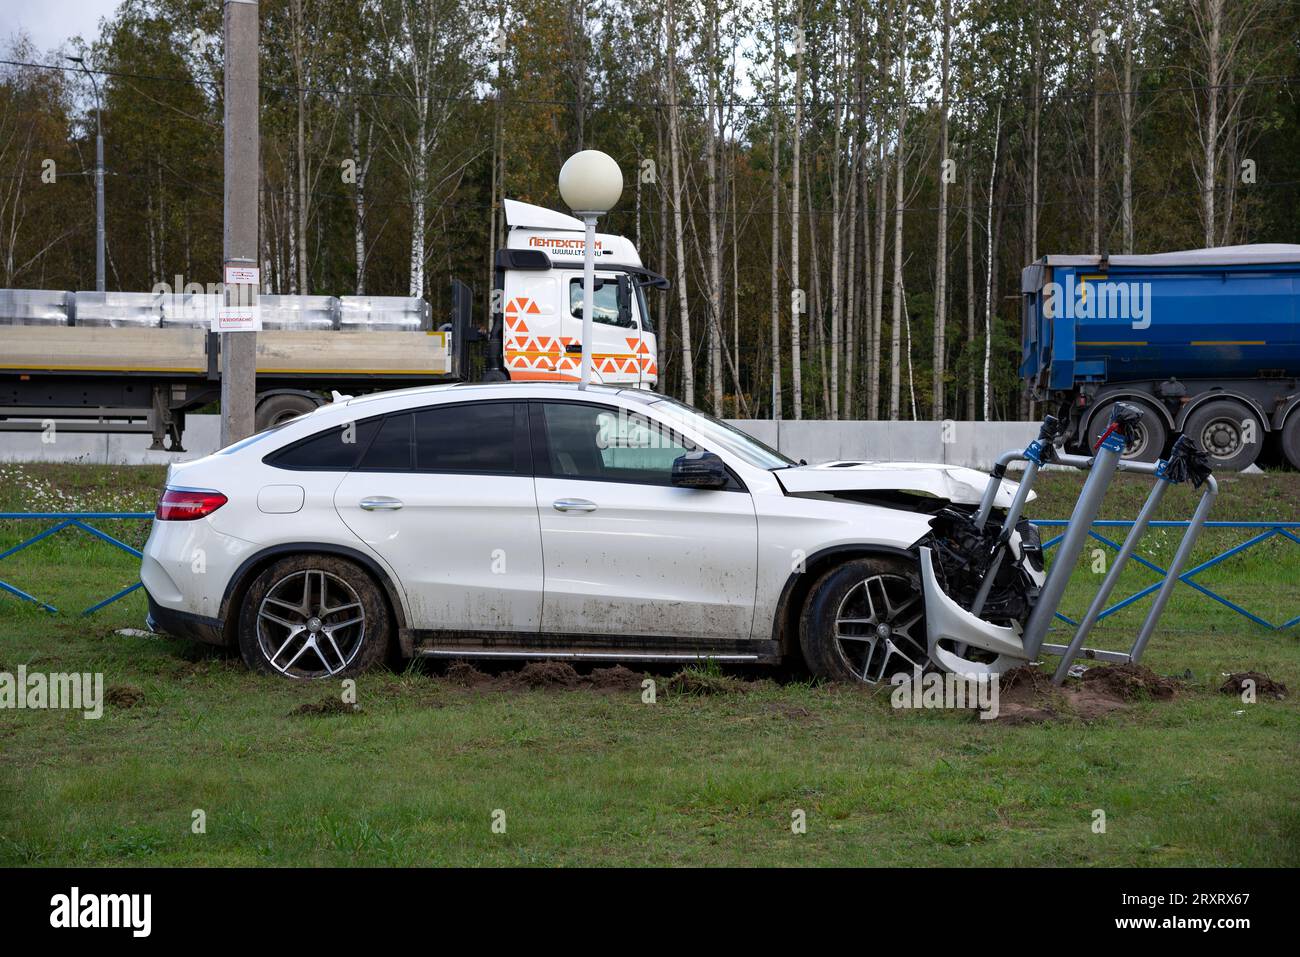 LENINGRAD REGION, RUSSIA - SEPTEMBER 25, 2023: A passenger car crashed into equipment at a gas station. Russia Stock Photo